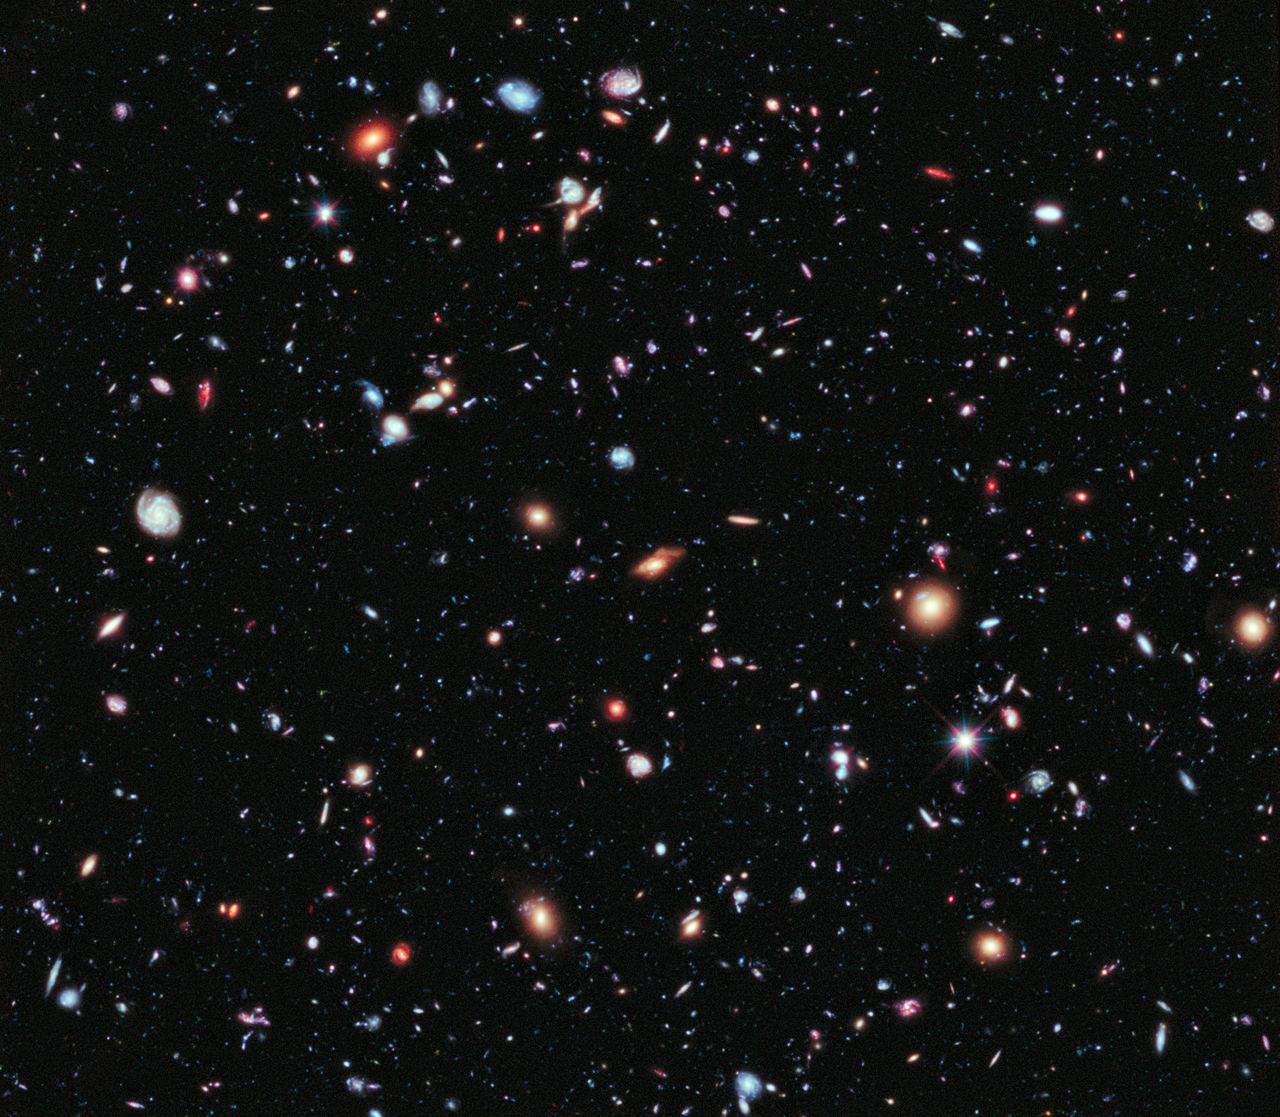 http://hubblesite.org/newscenter/archive/releases/2012/37/image/a/format/xlarge_web/